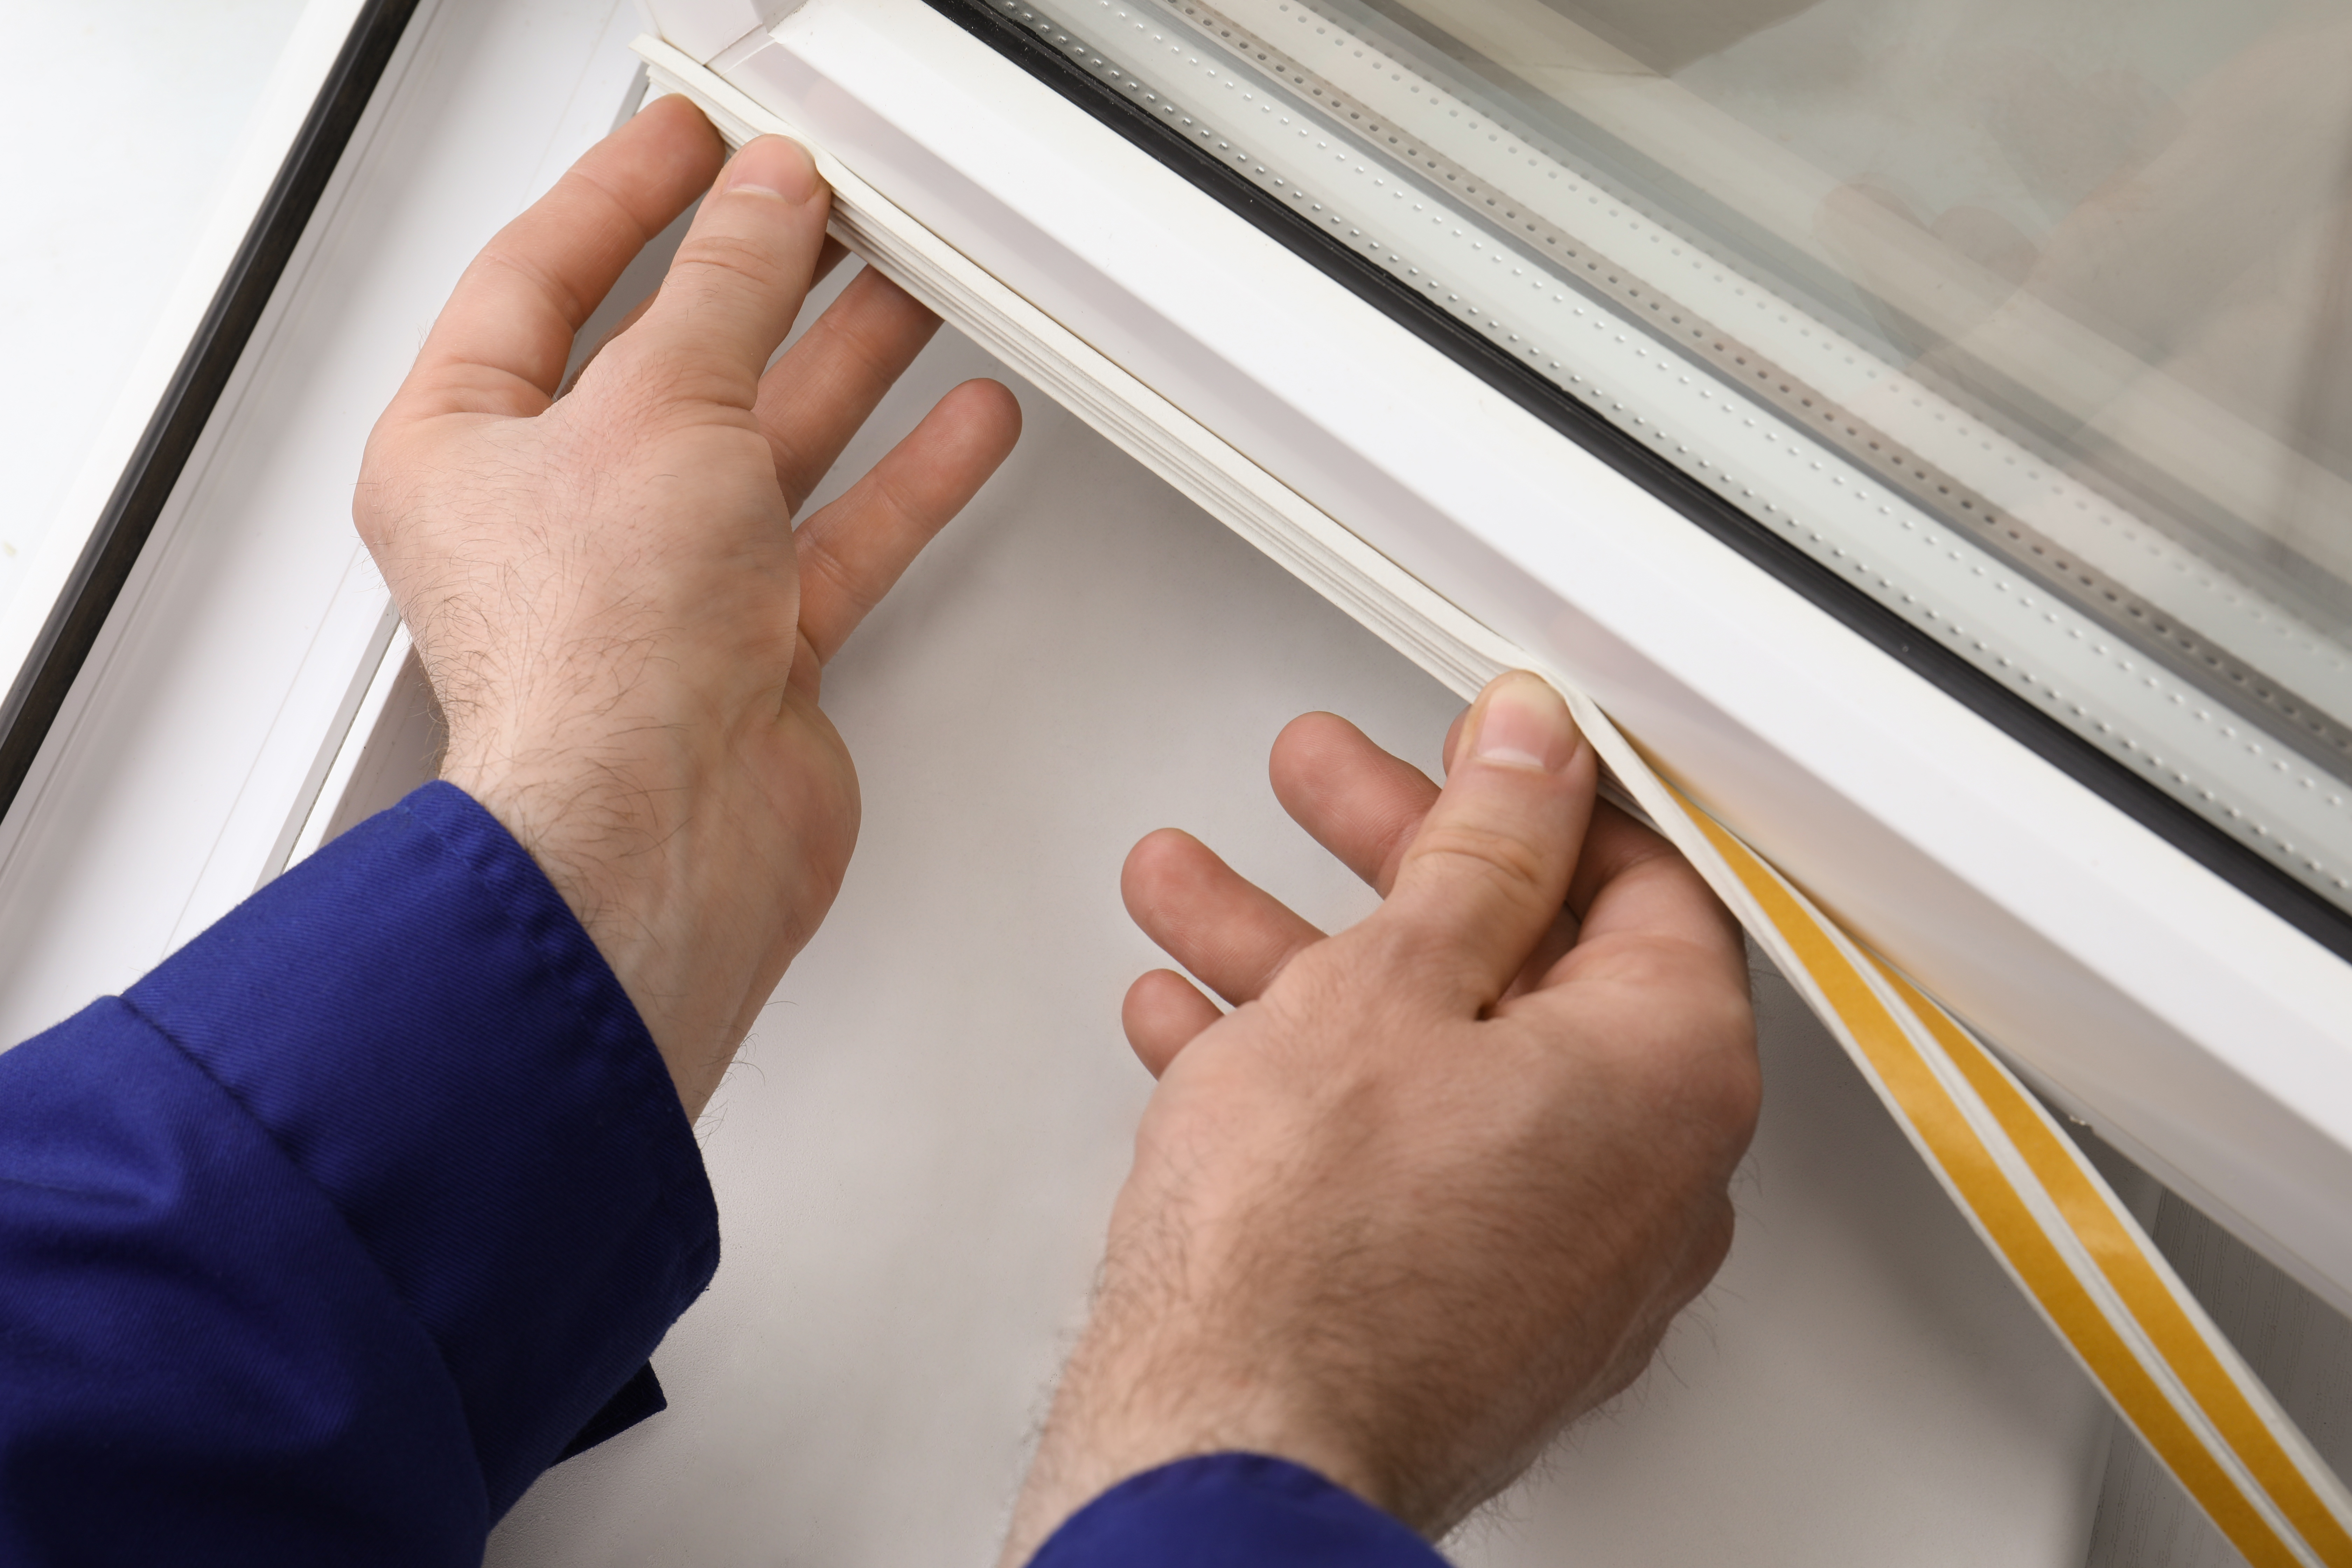 filling in gaps in the edge of windows to keep home warm in winter